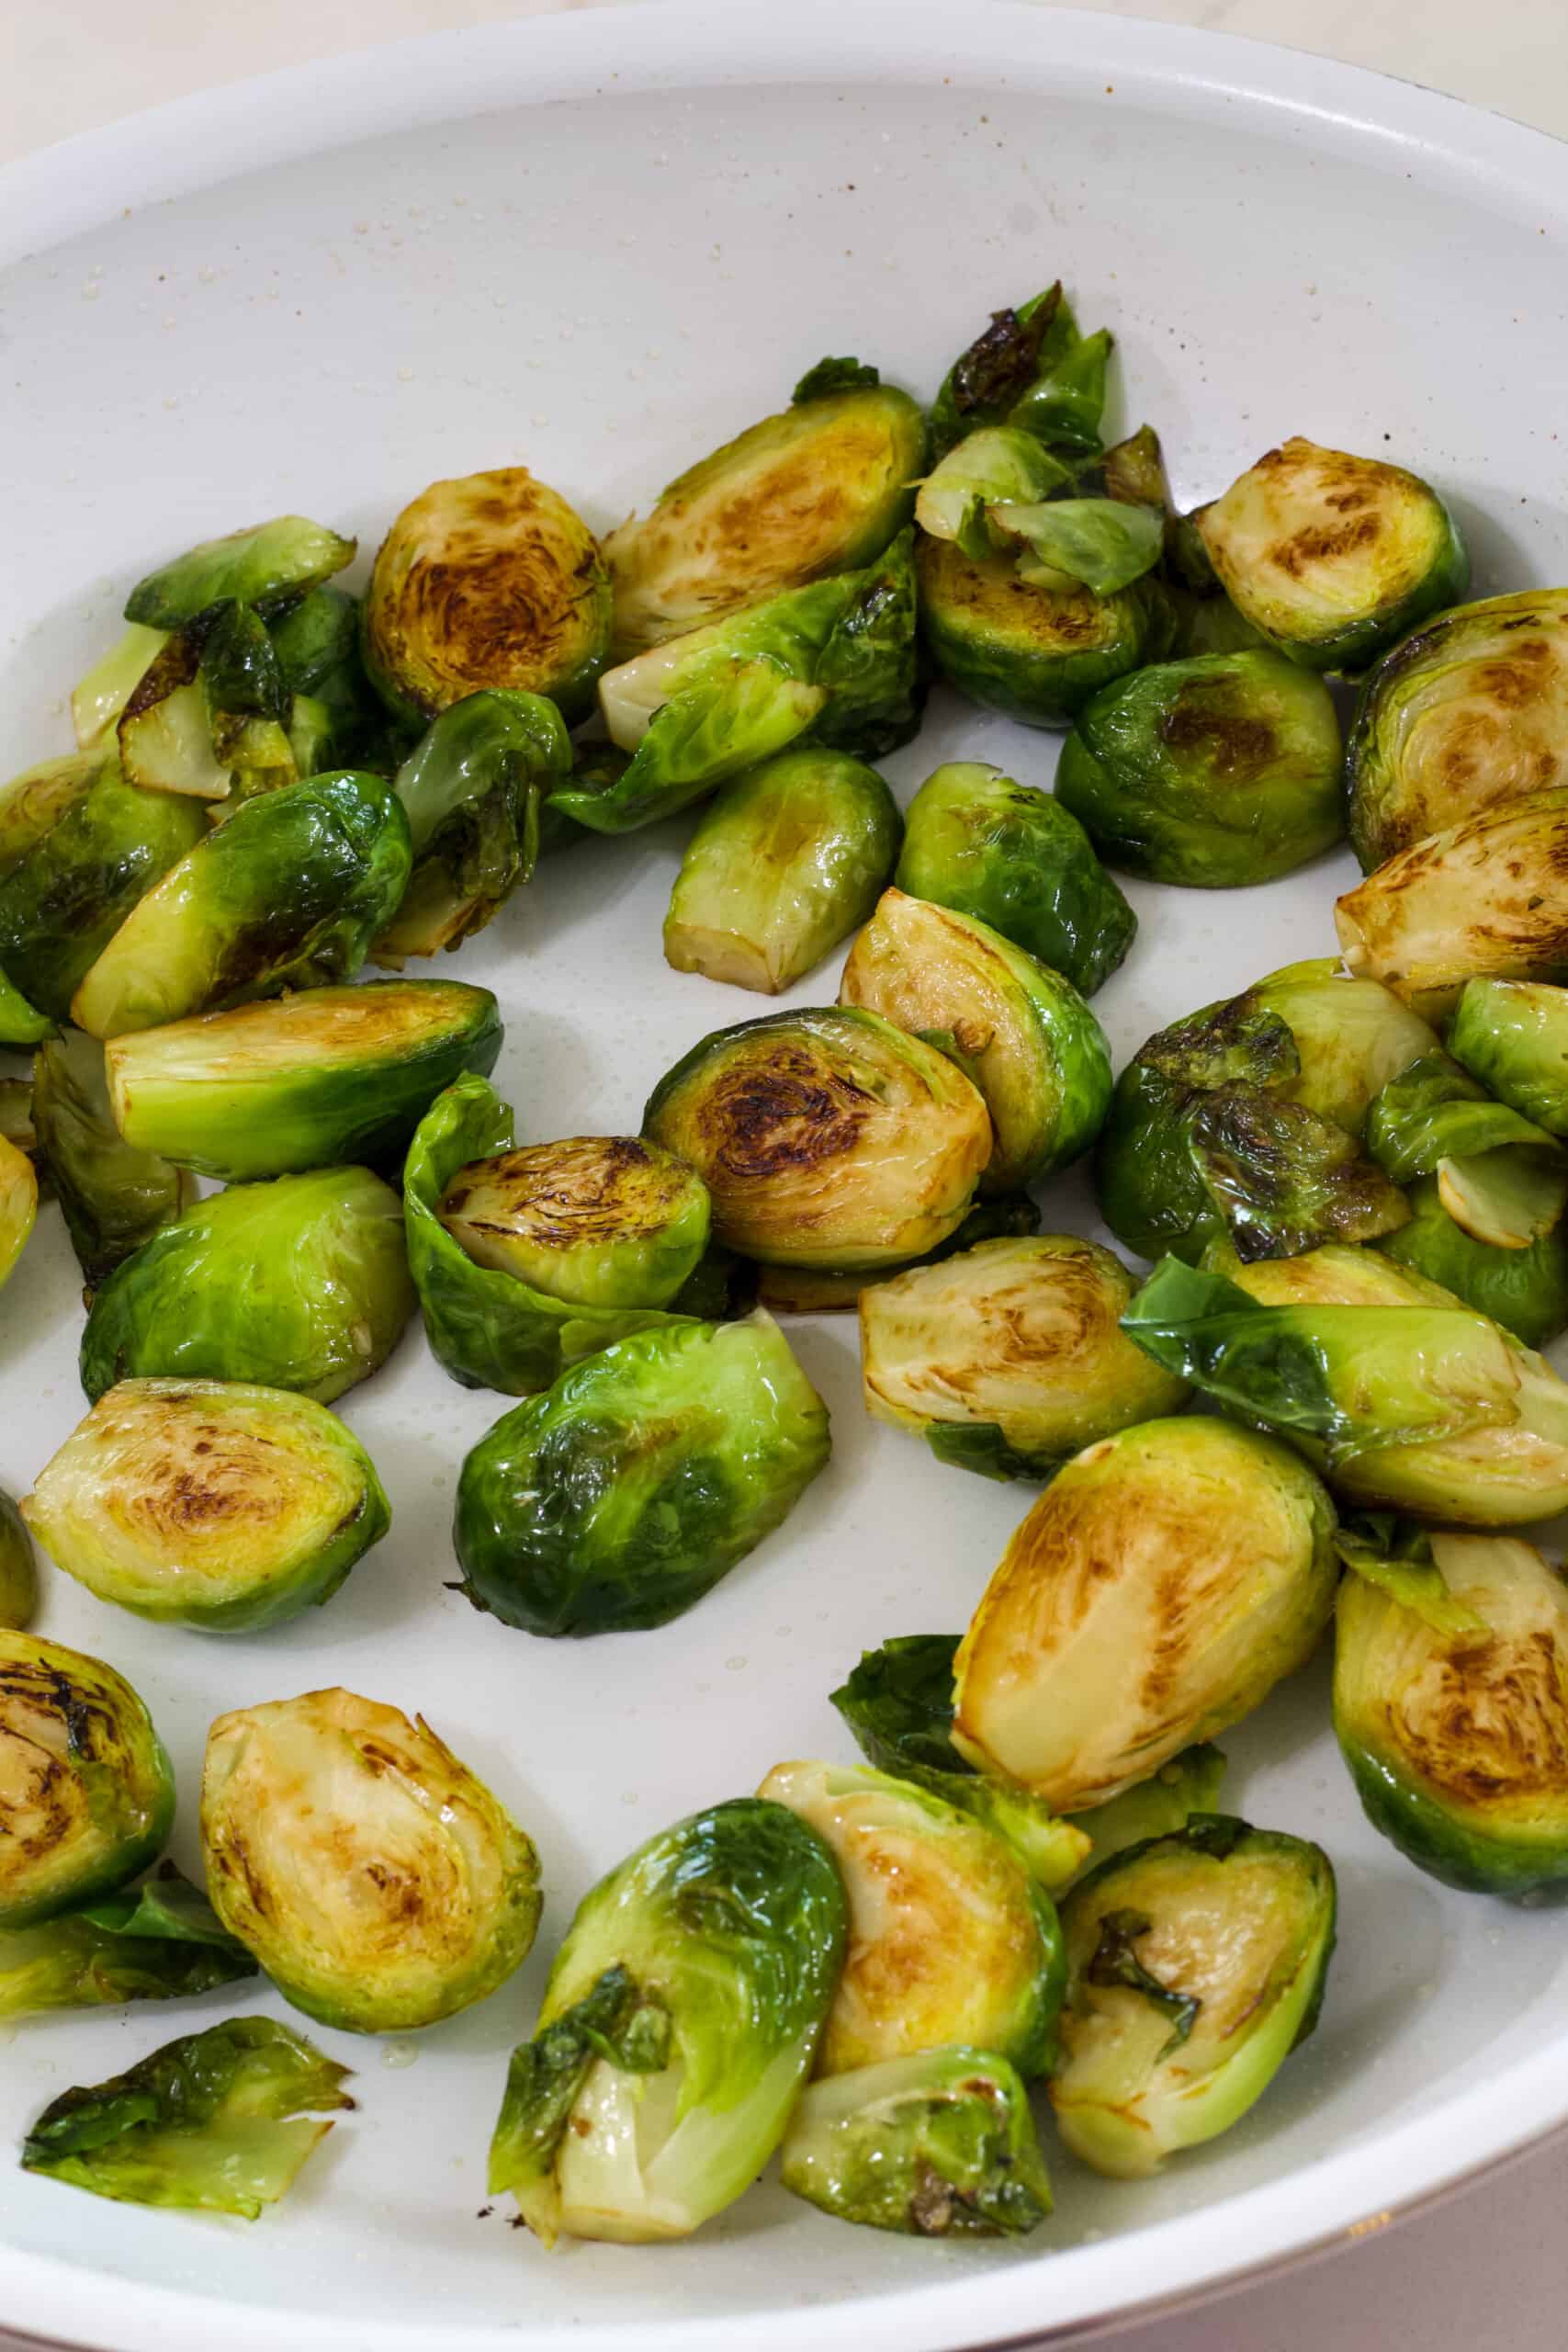 The cooked Brussels sprouts in the frying pan before the sauce is added.